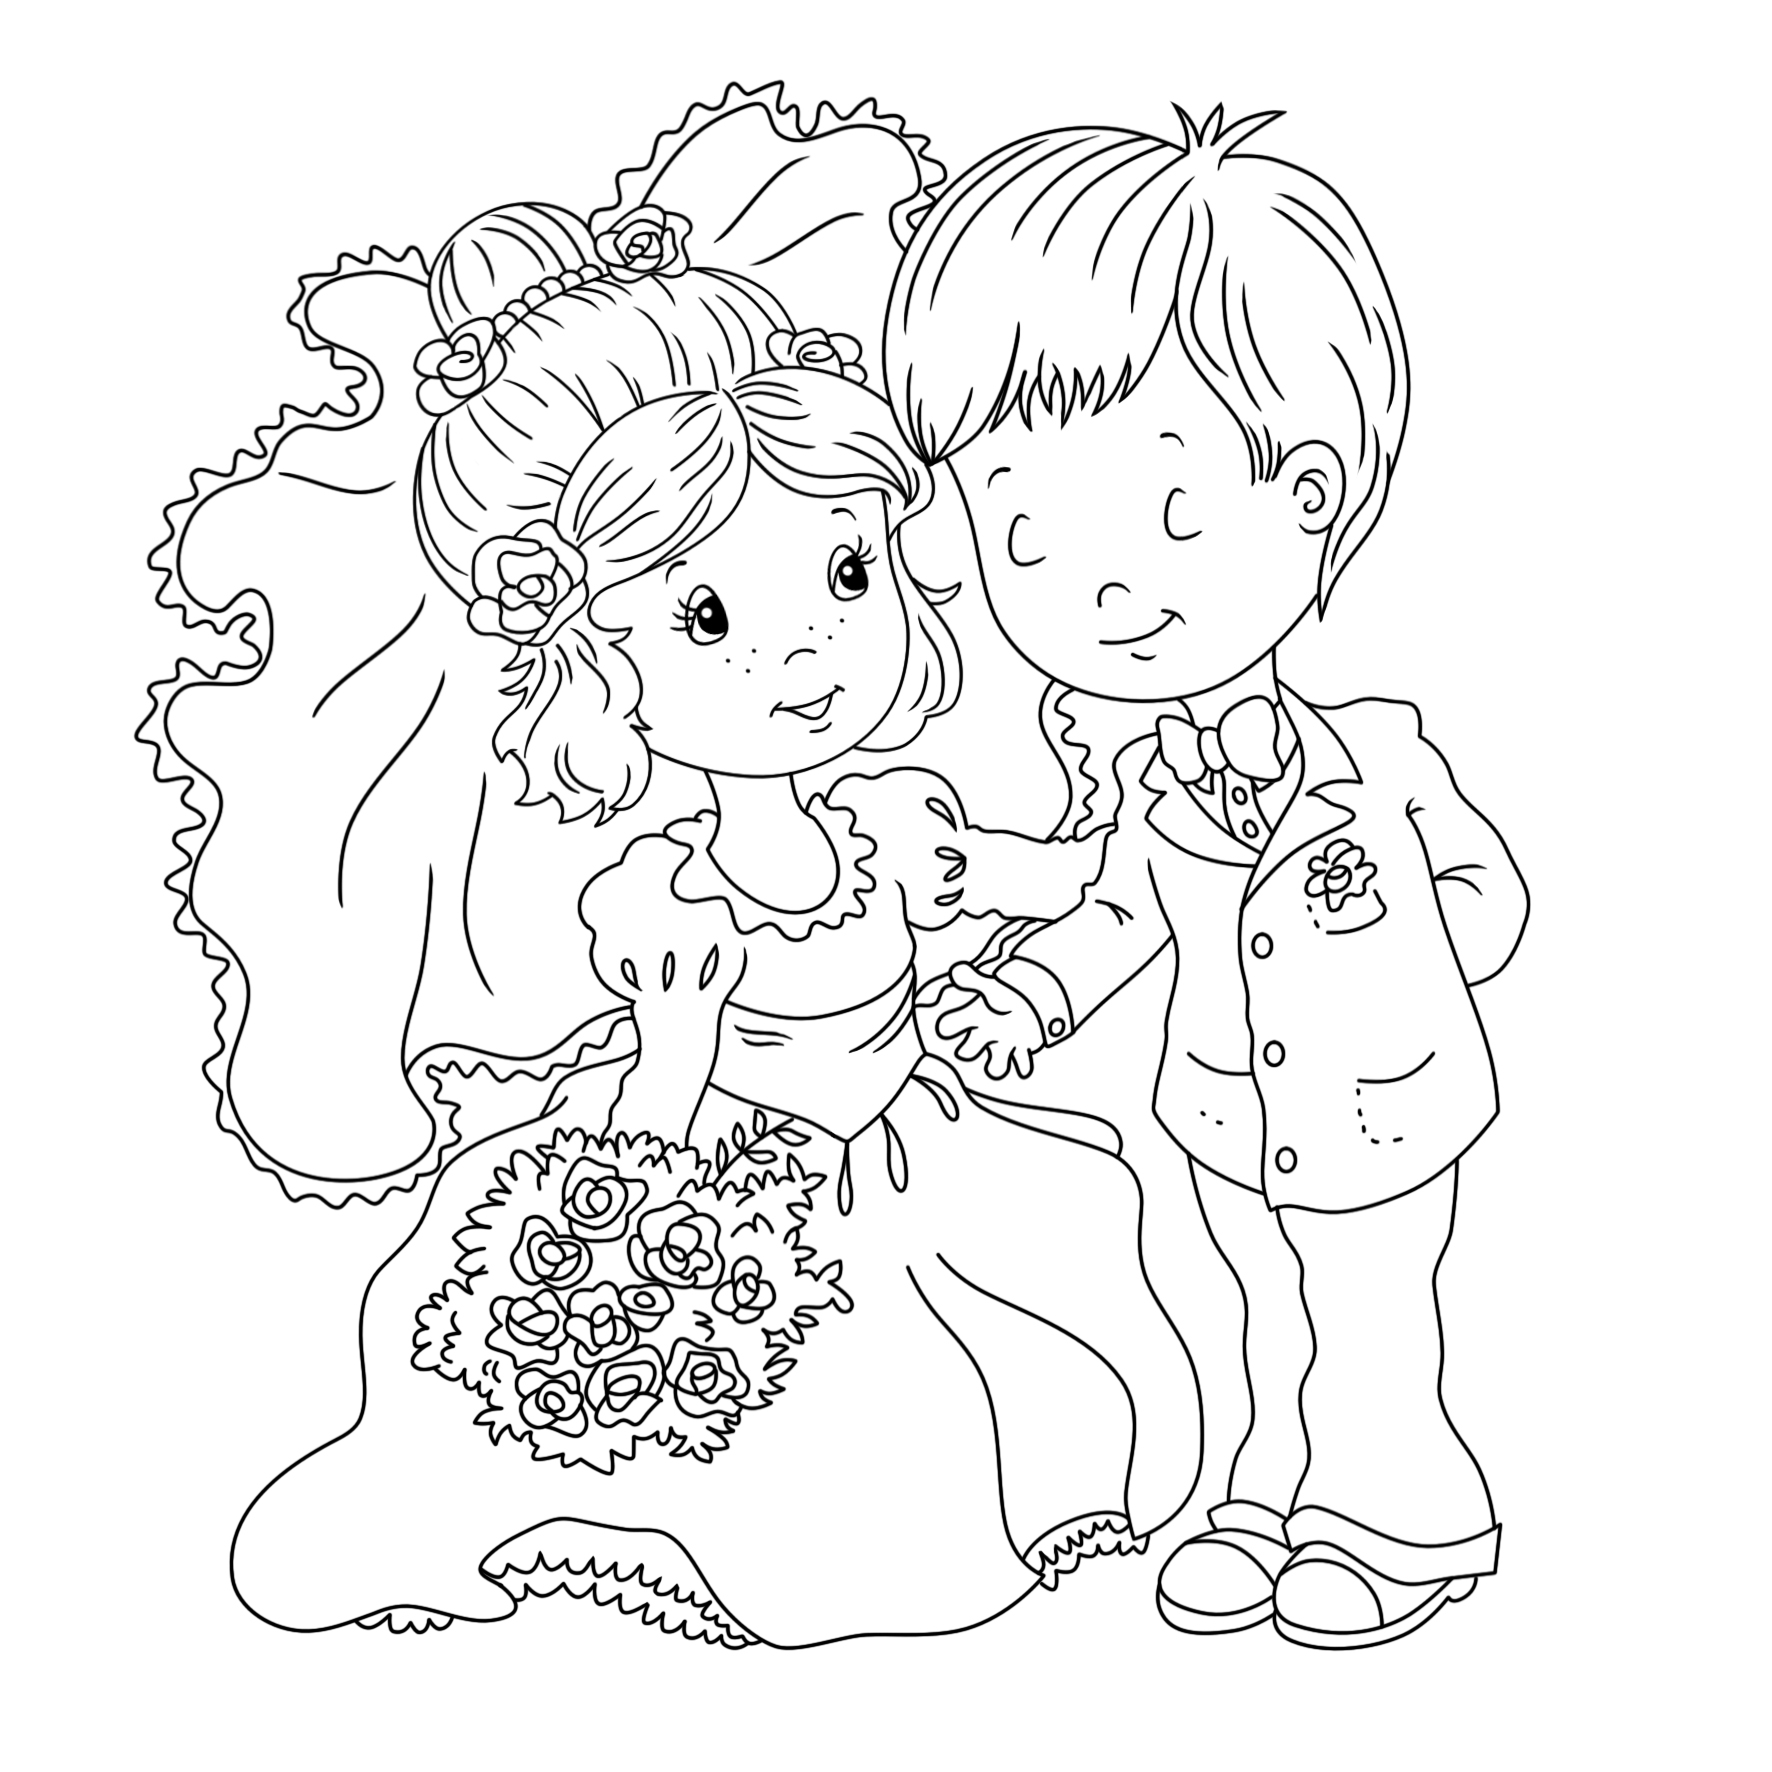 downloadable coloring pages for wedding